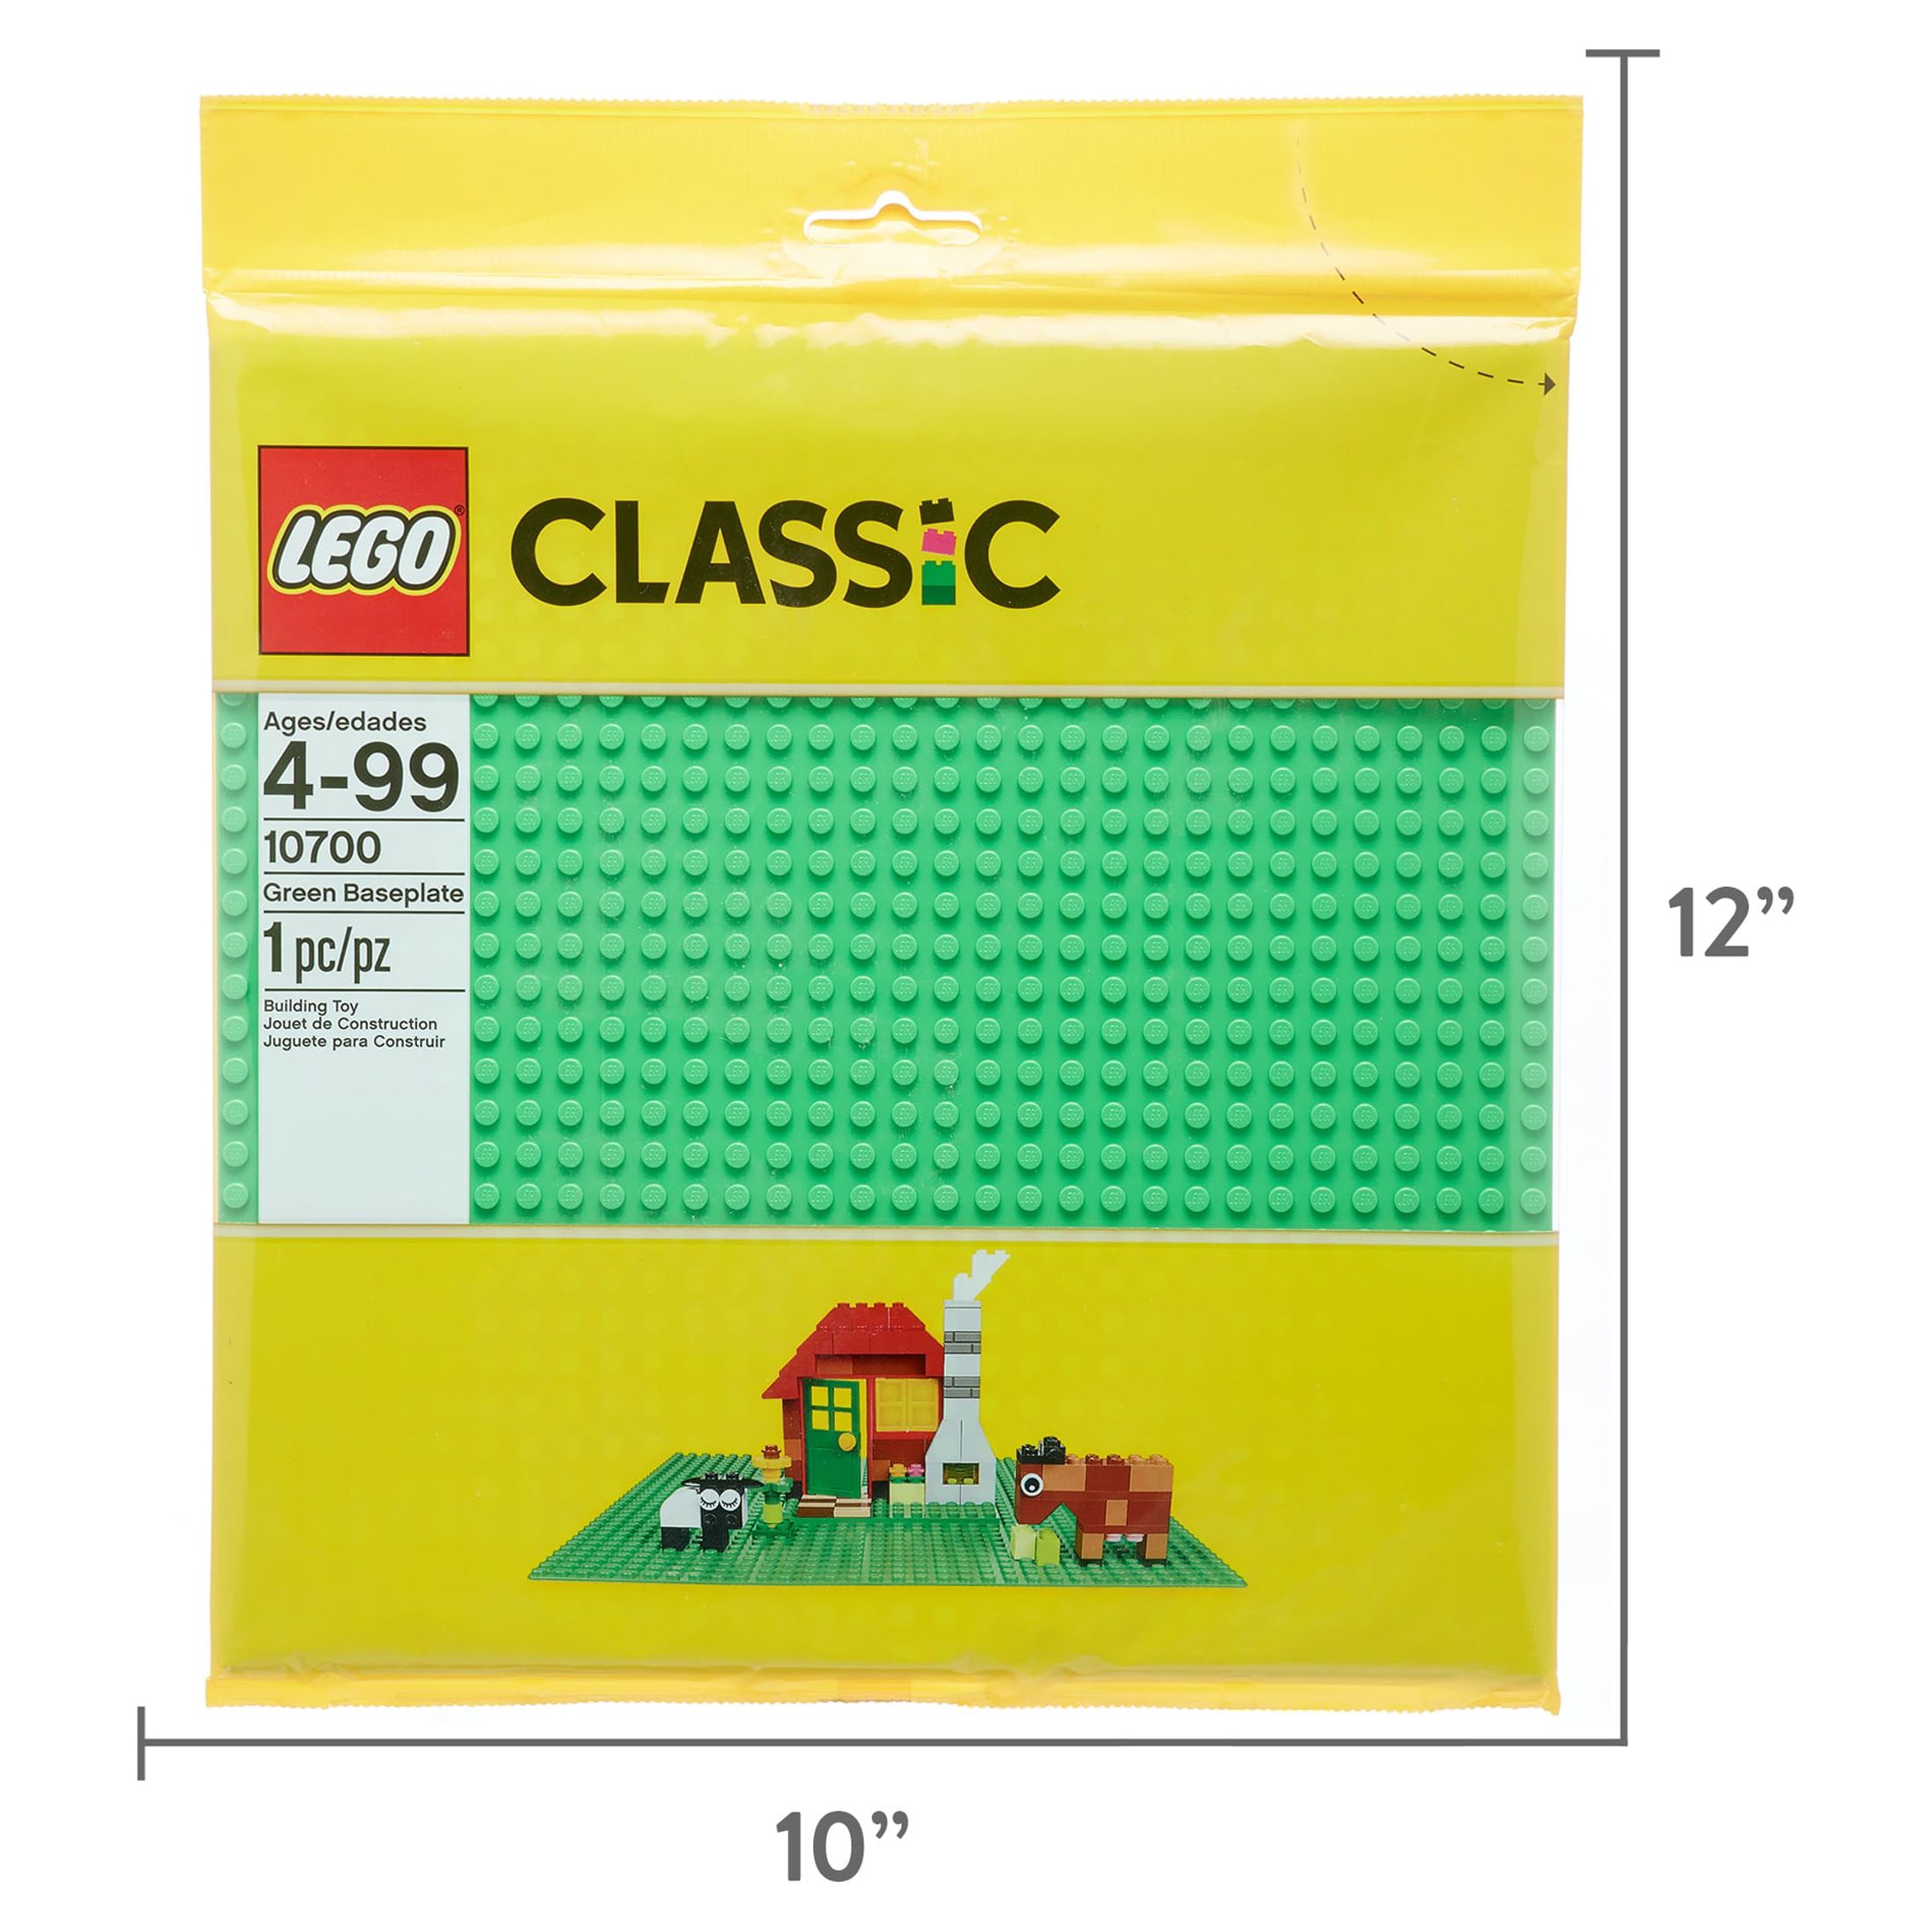 LEGO Classic Green Baseplate 10700 Building Accessory (1 Piece) - image 6 of 6